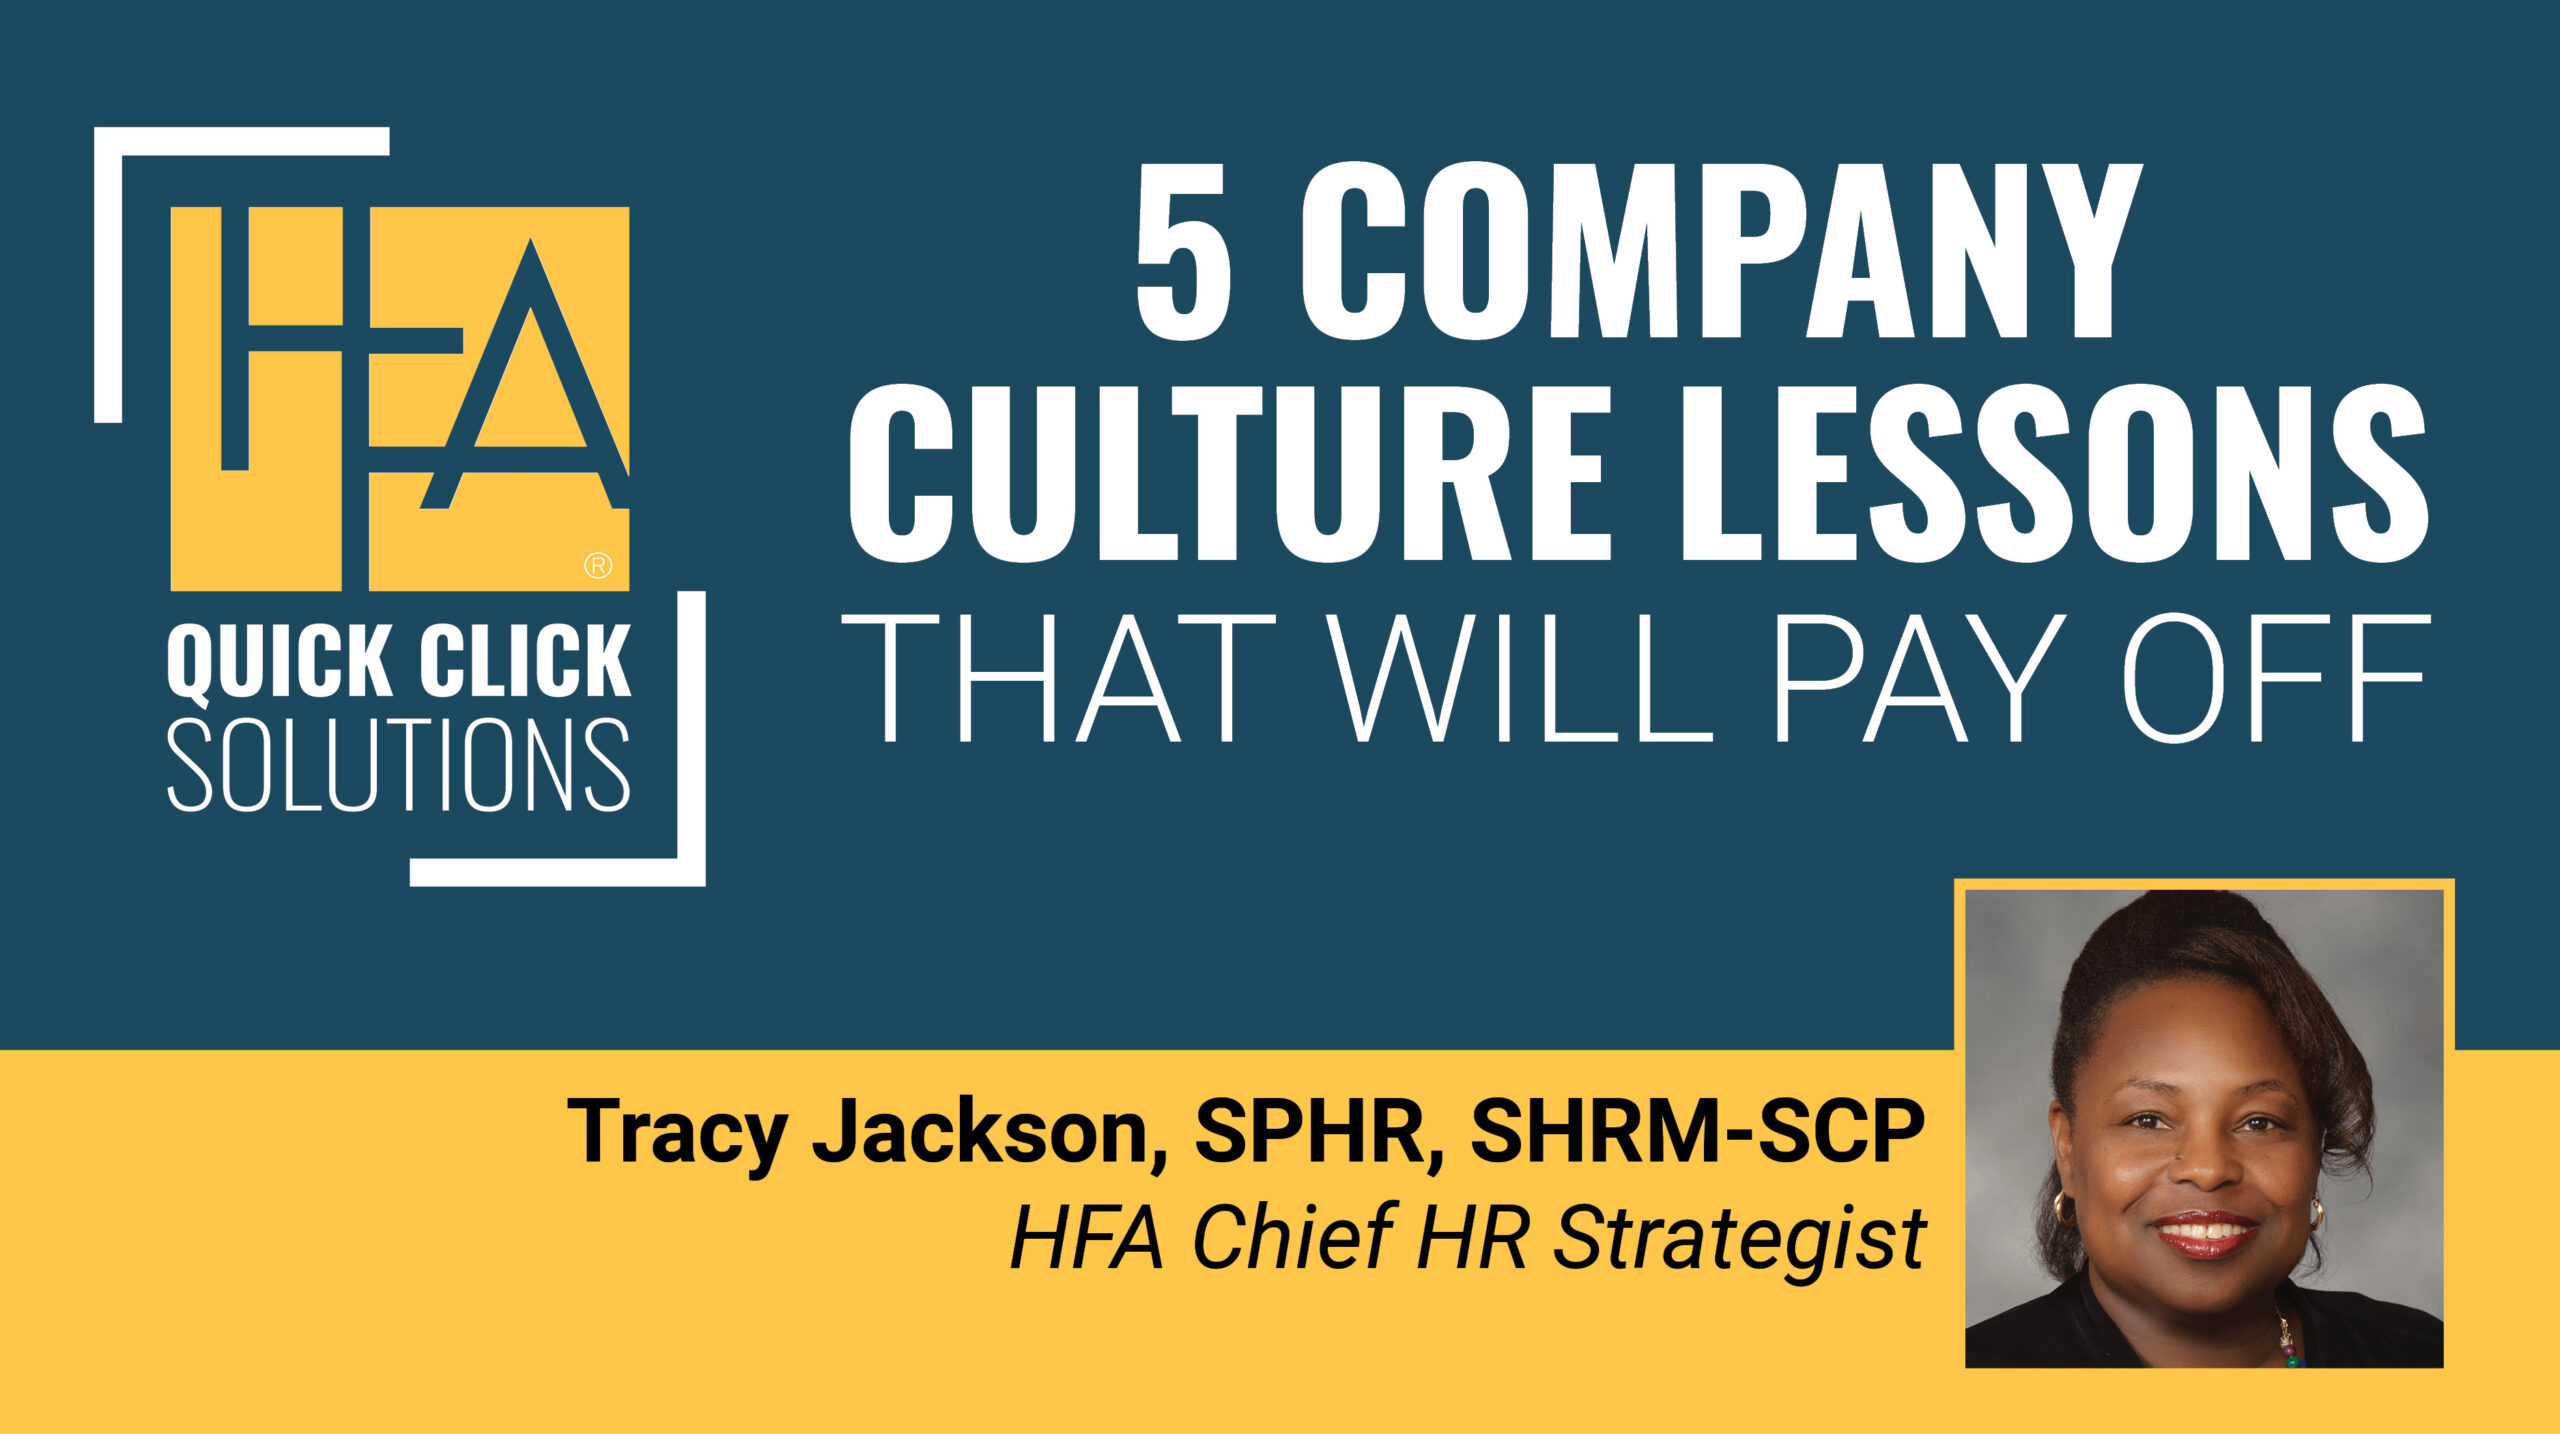 HFA-QCS 5 Company Culture Lessons That Will Pay Off